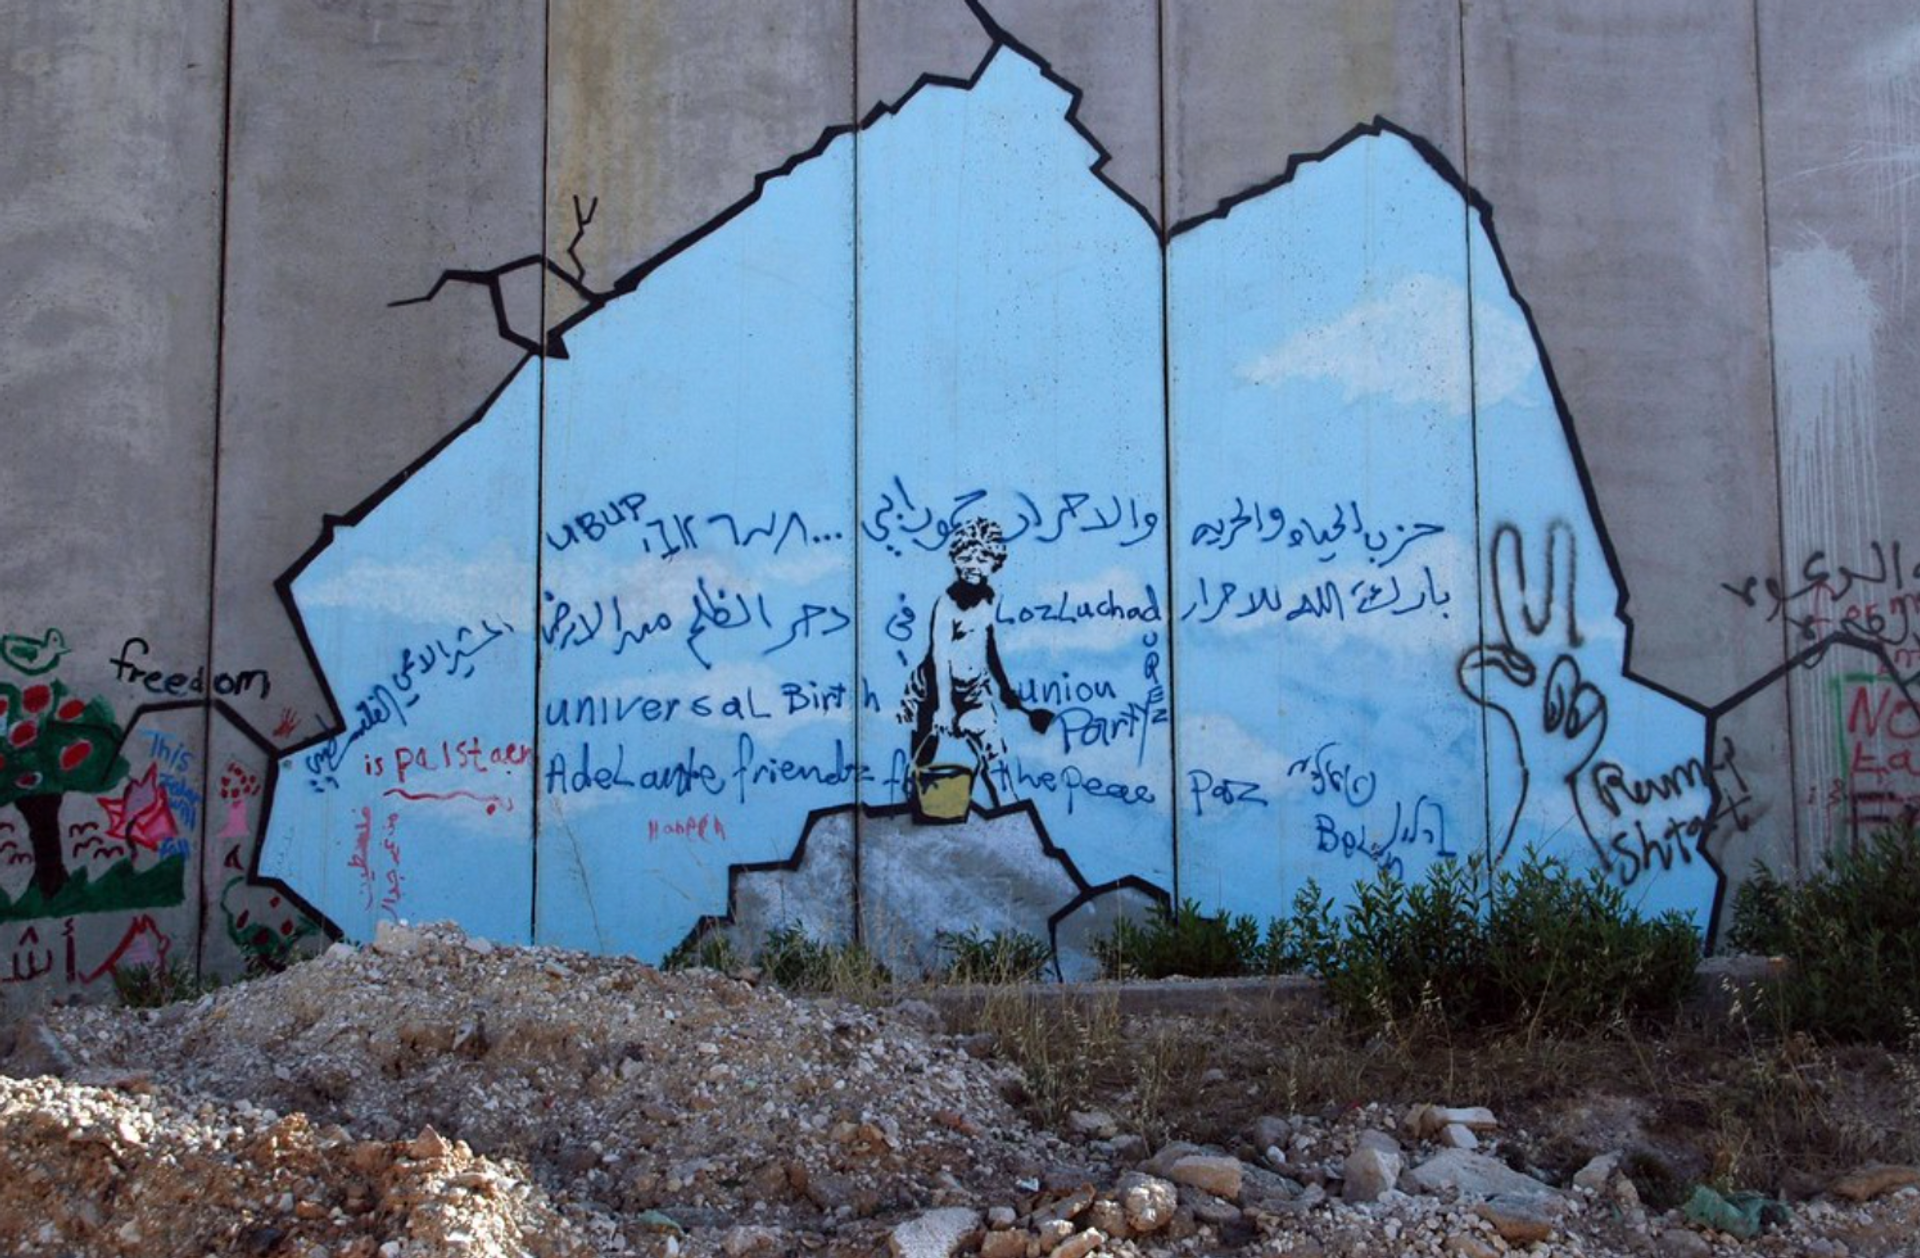 The Segregation Wall by Banksy